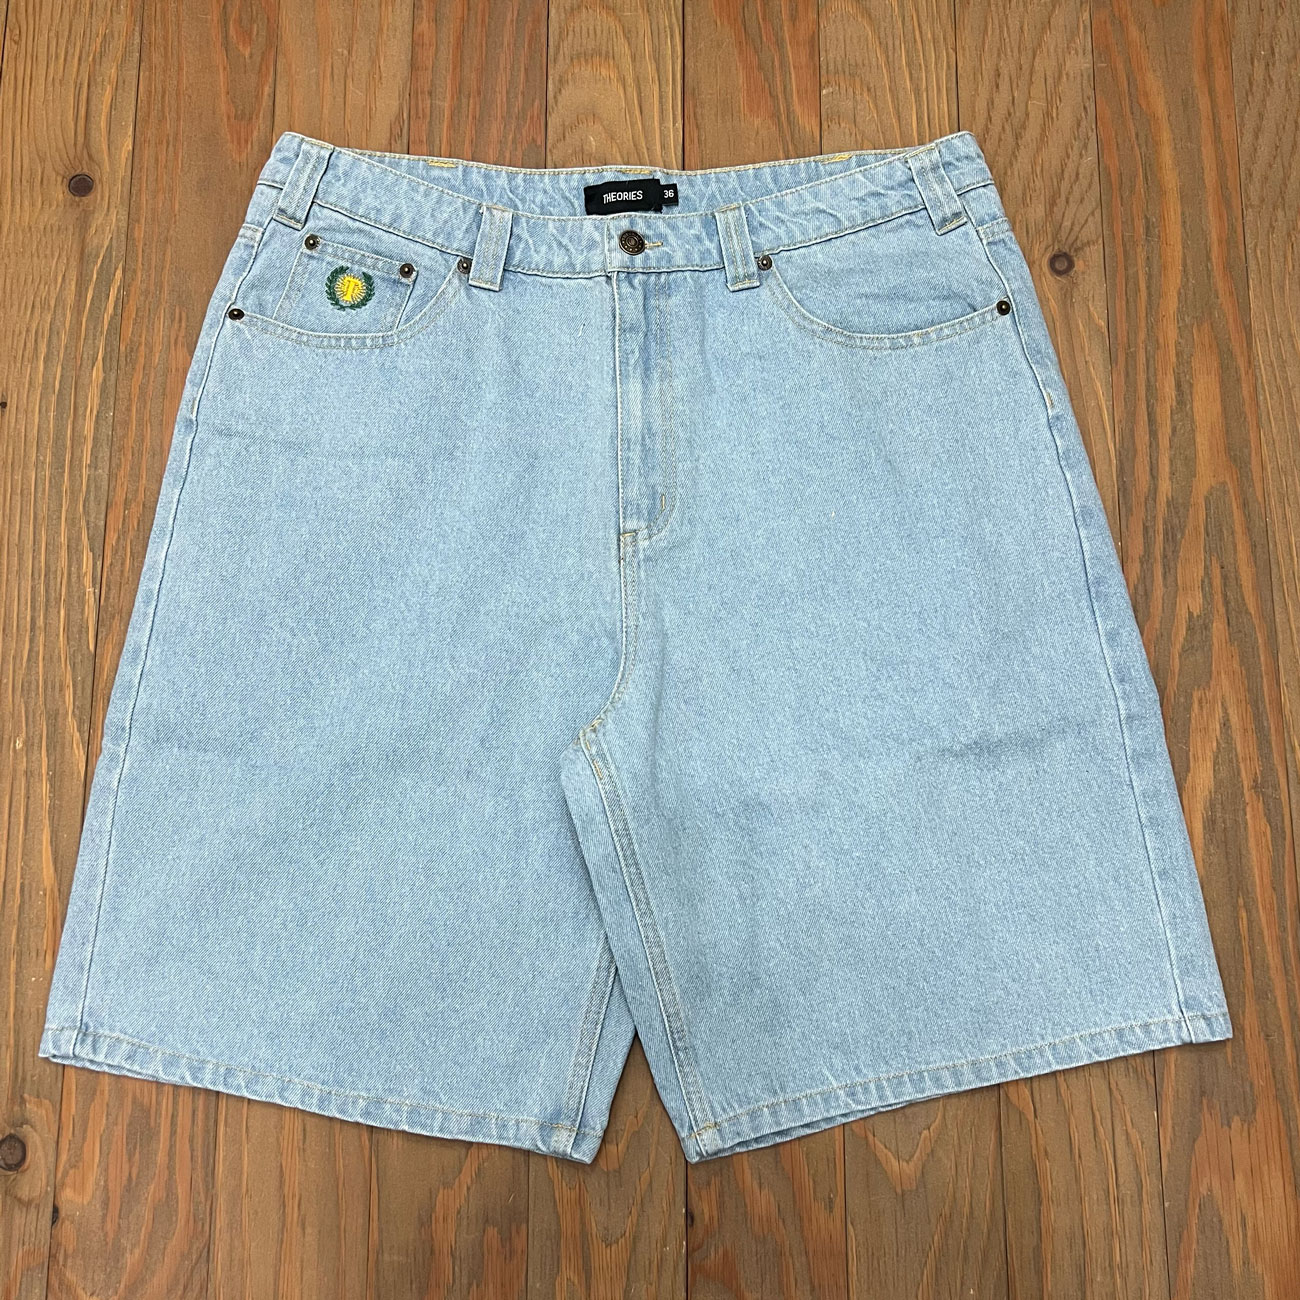 THEORIES PLAZA HALF JEANS WASHED BLUE